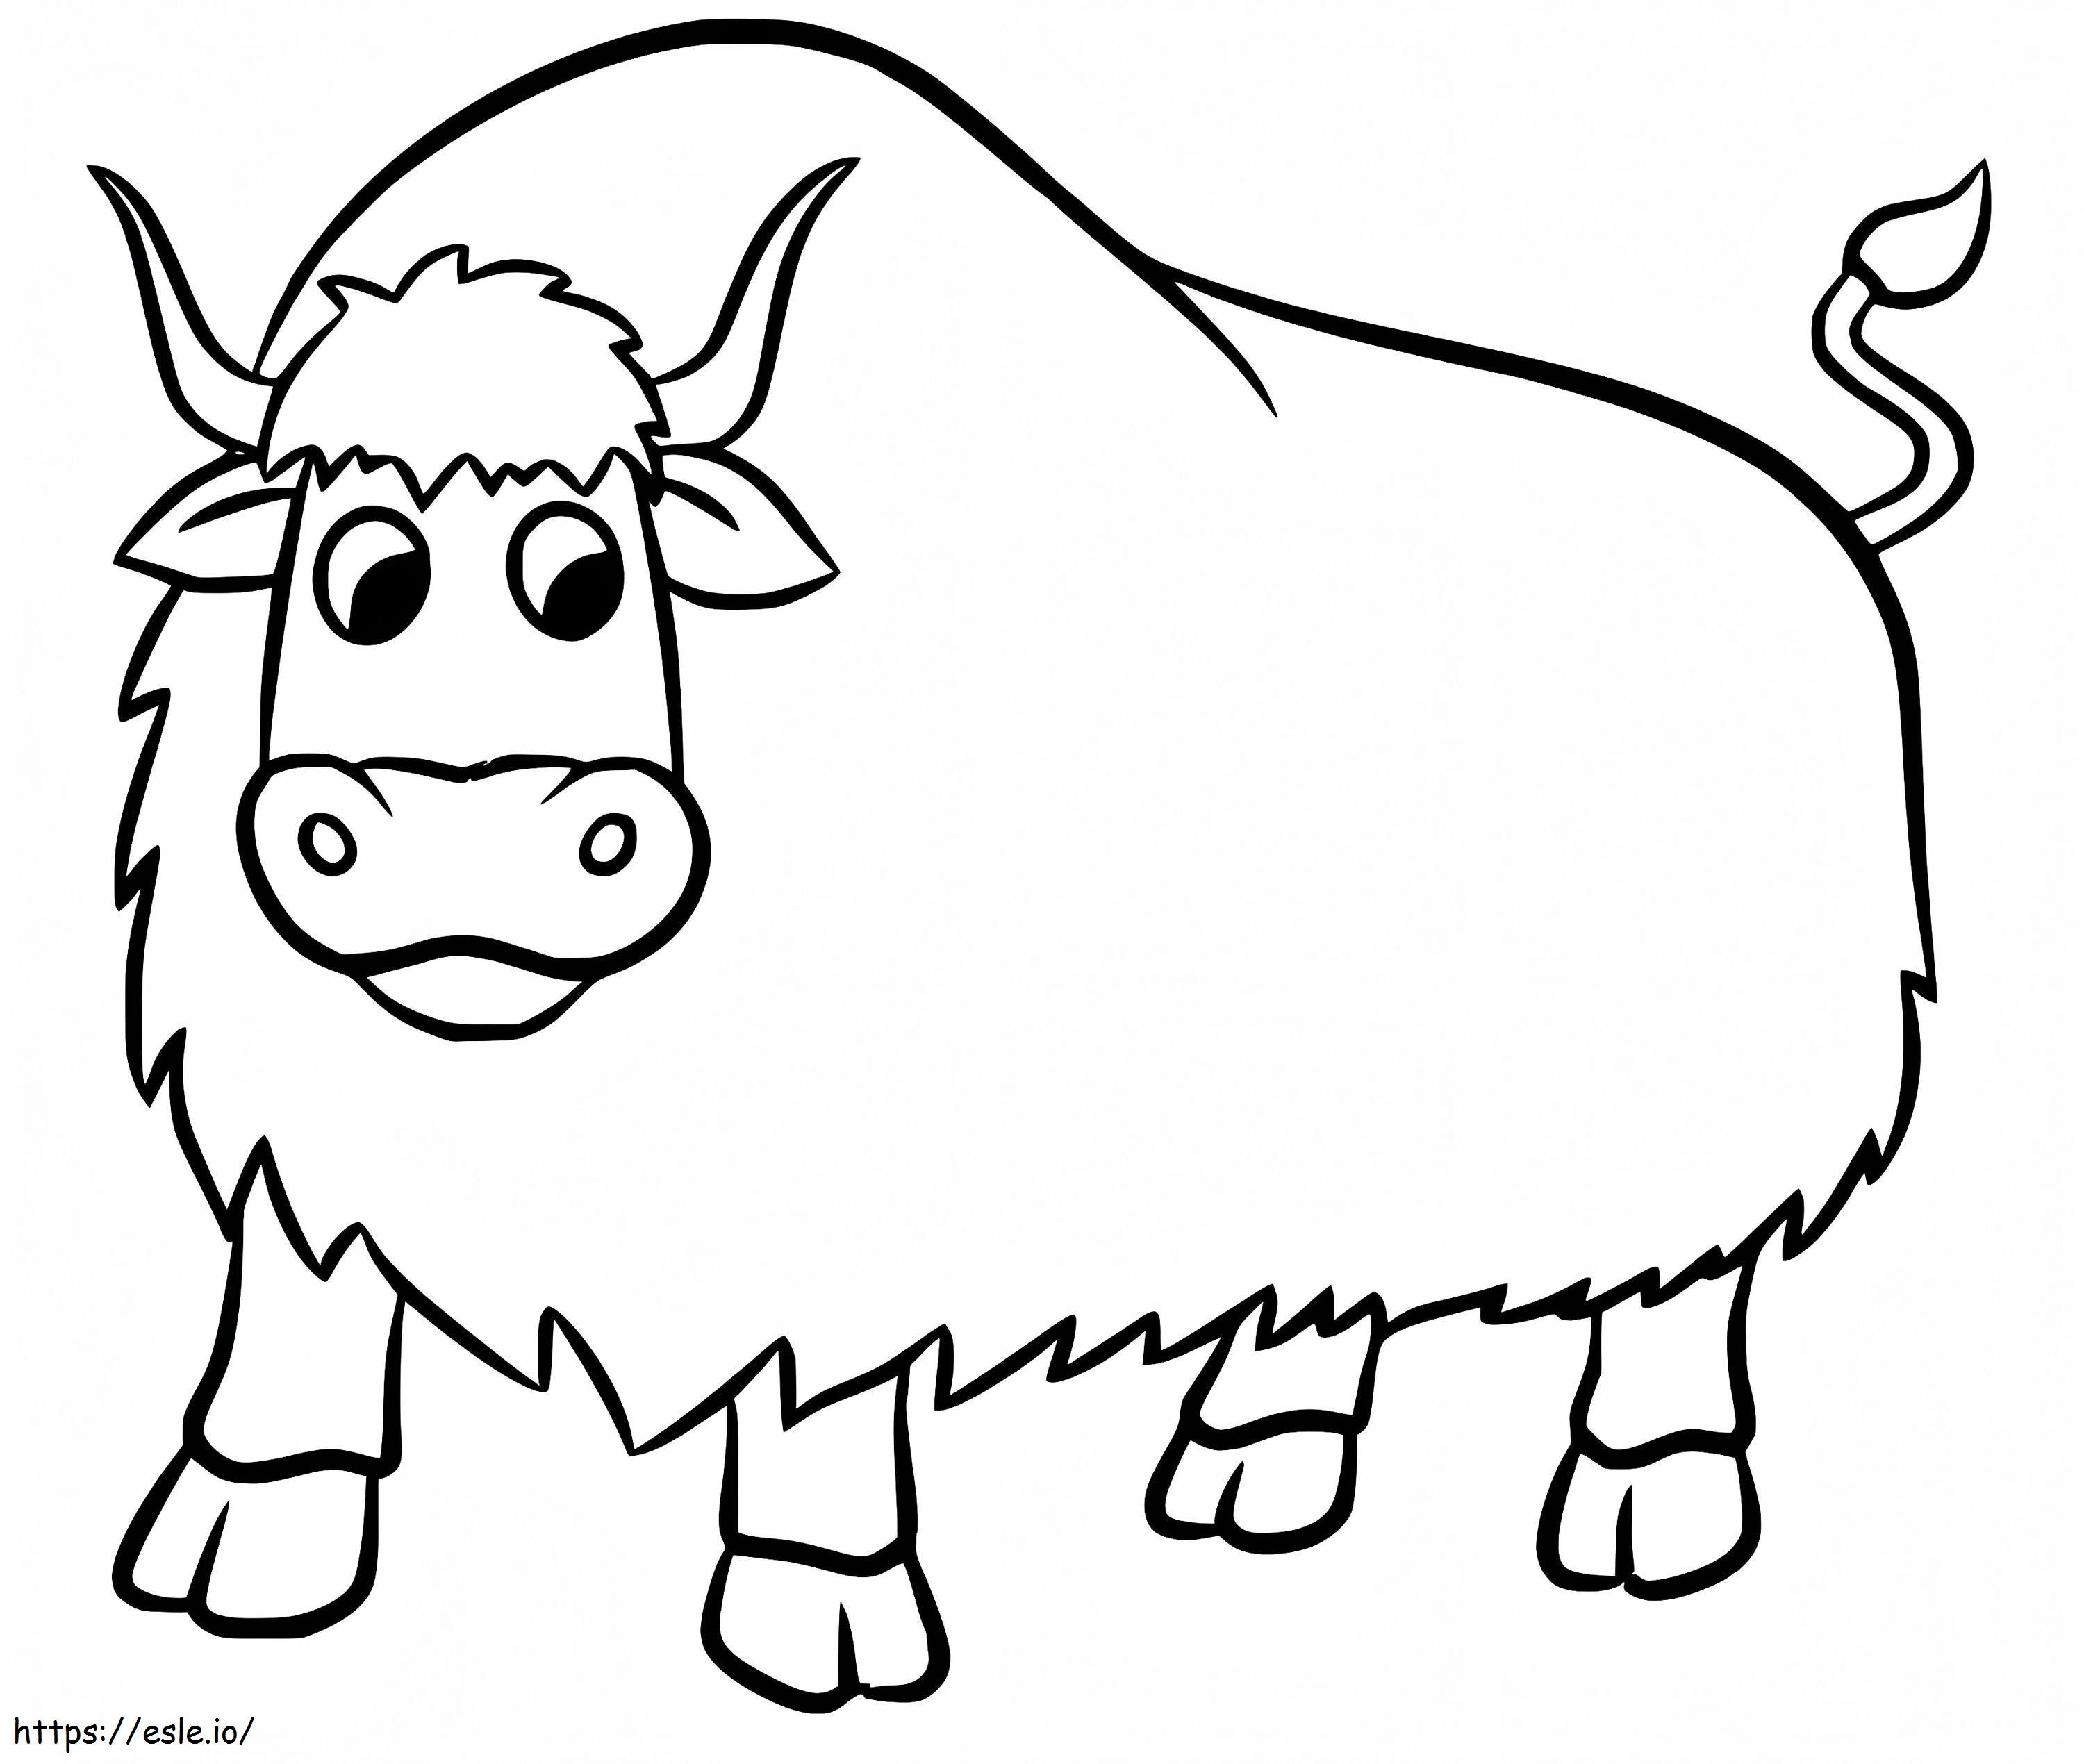 Funny Yak coloring page